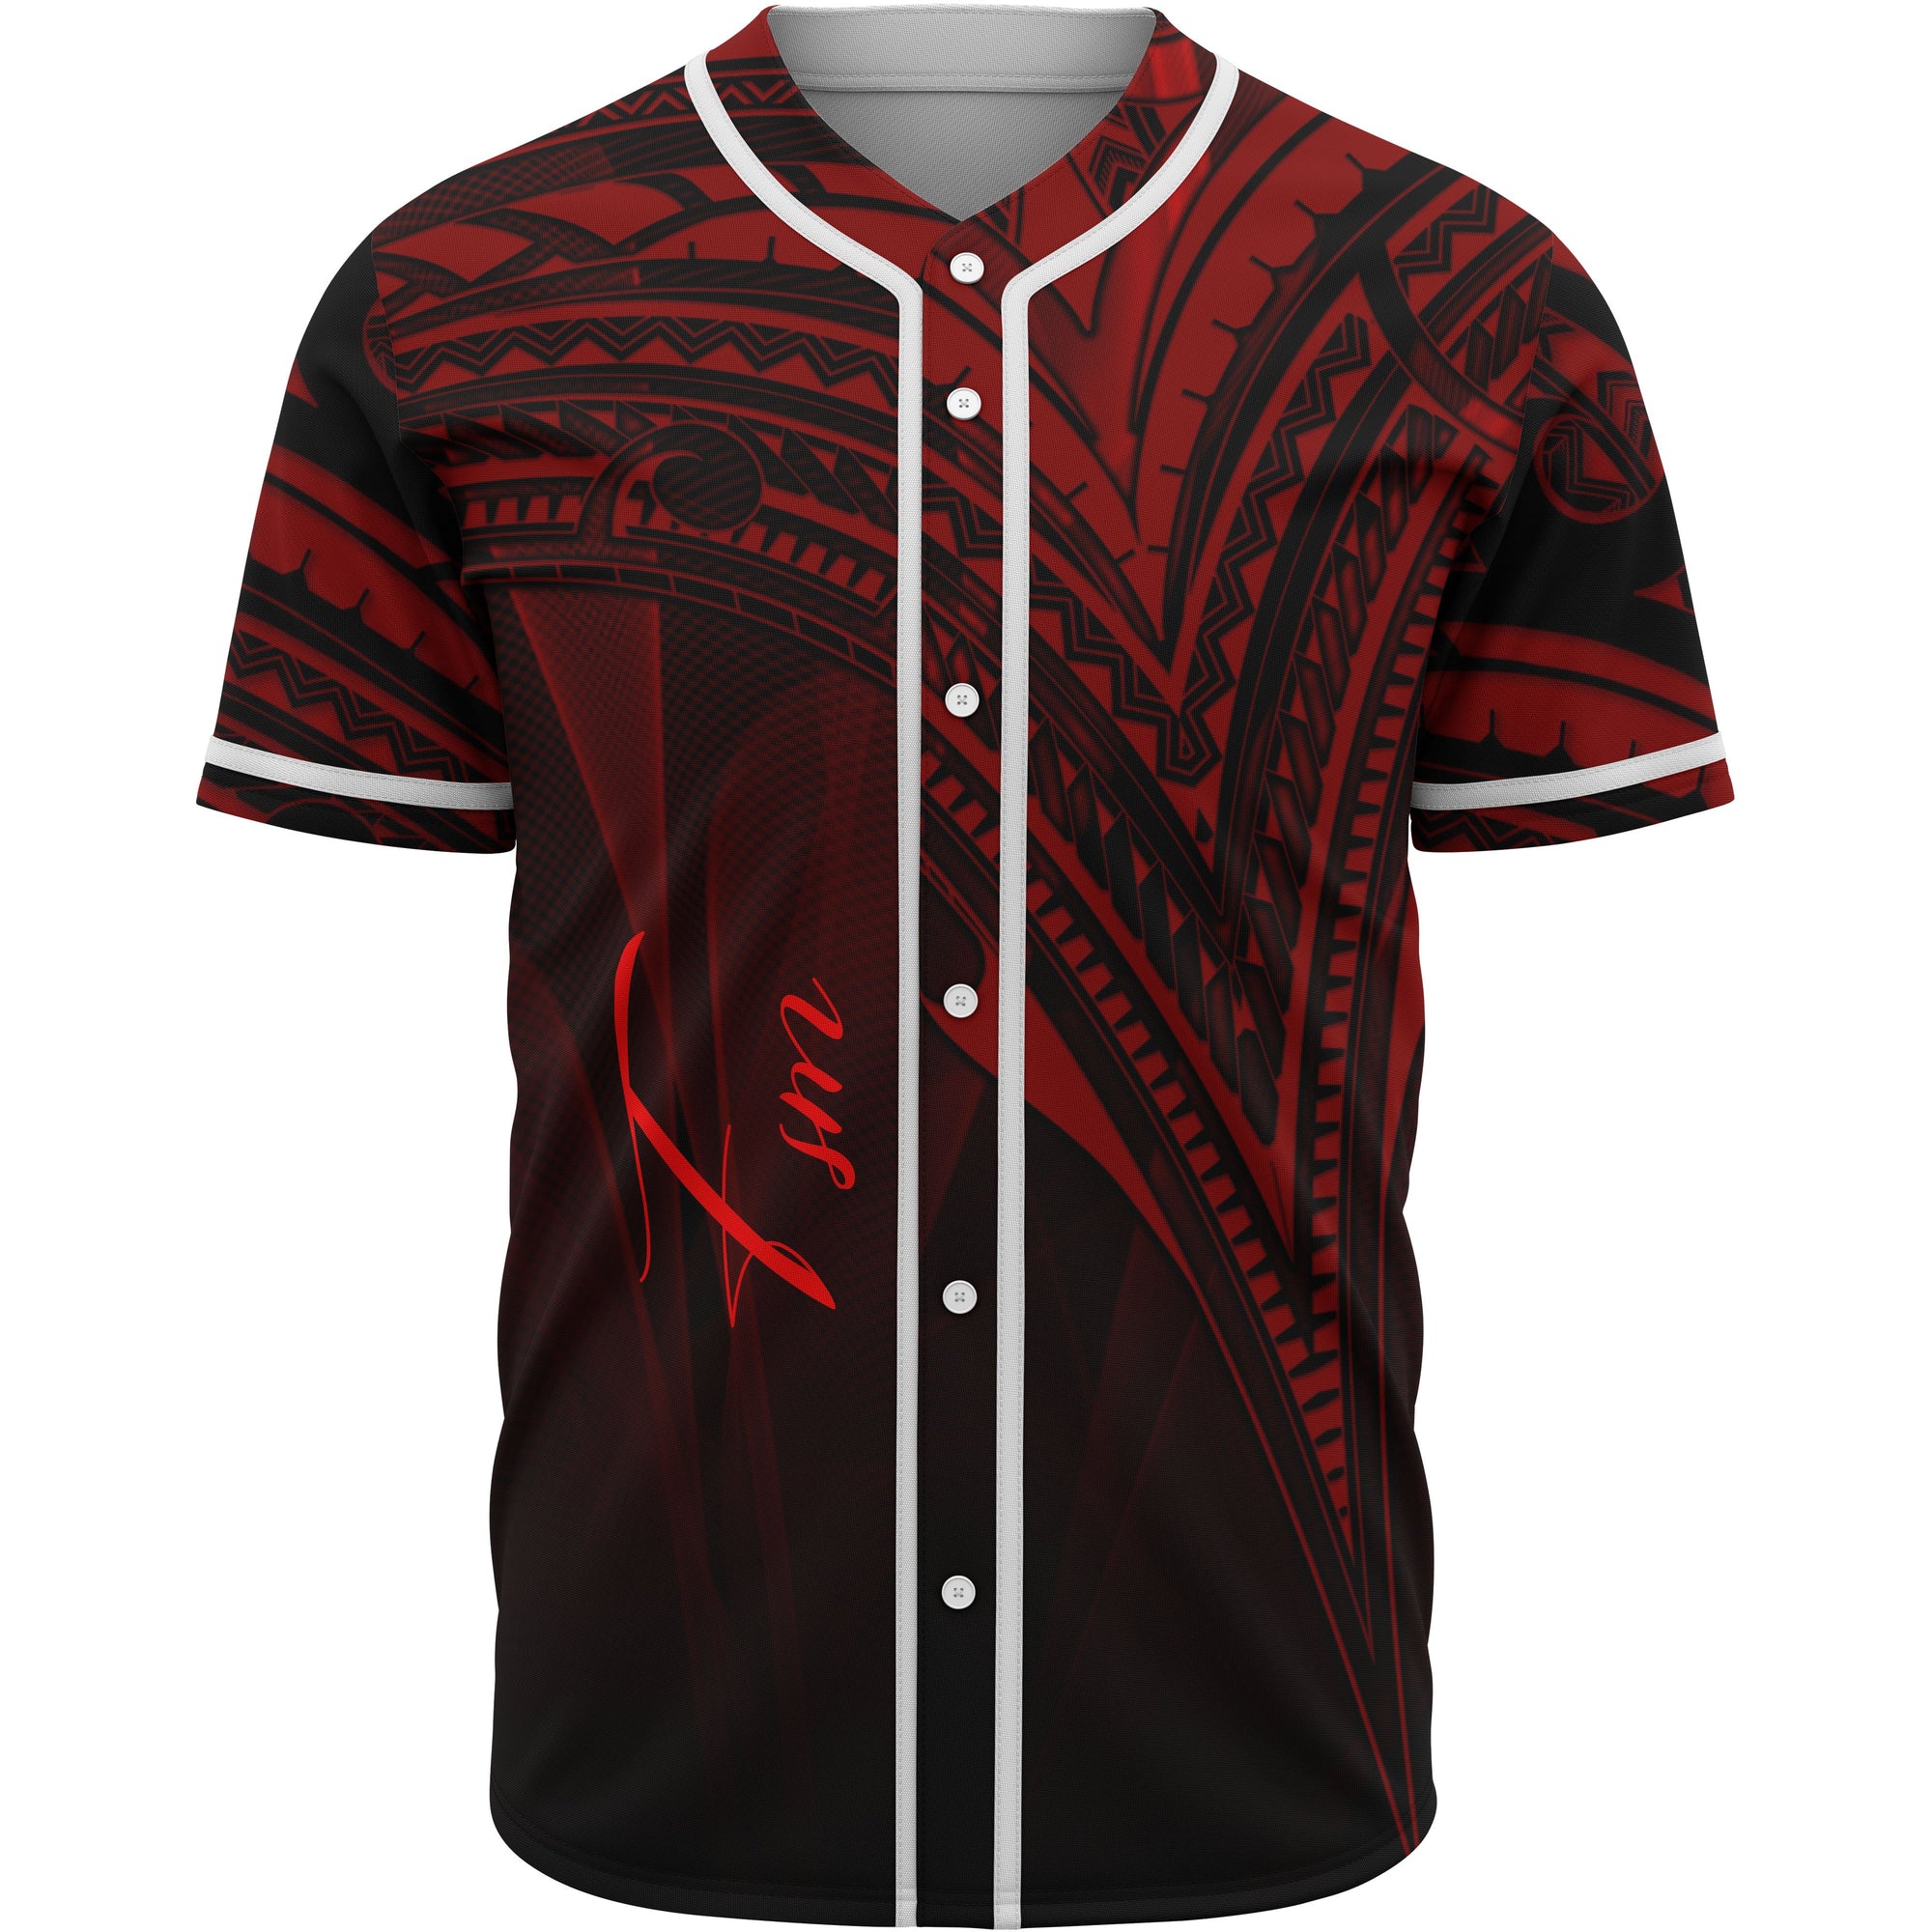 Federated States of Micronesia Baseball Shirt - Red Color Cross Style Unisex Black - Polynesian Pride